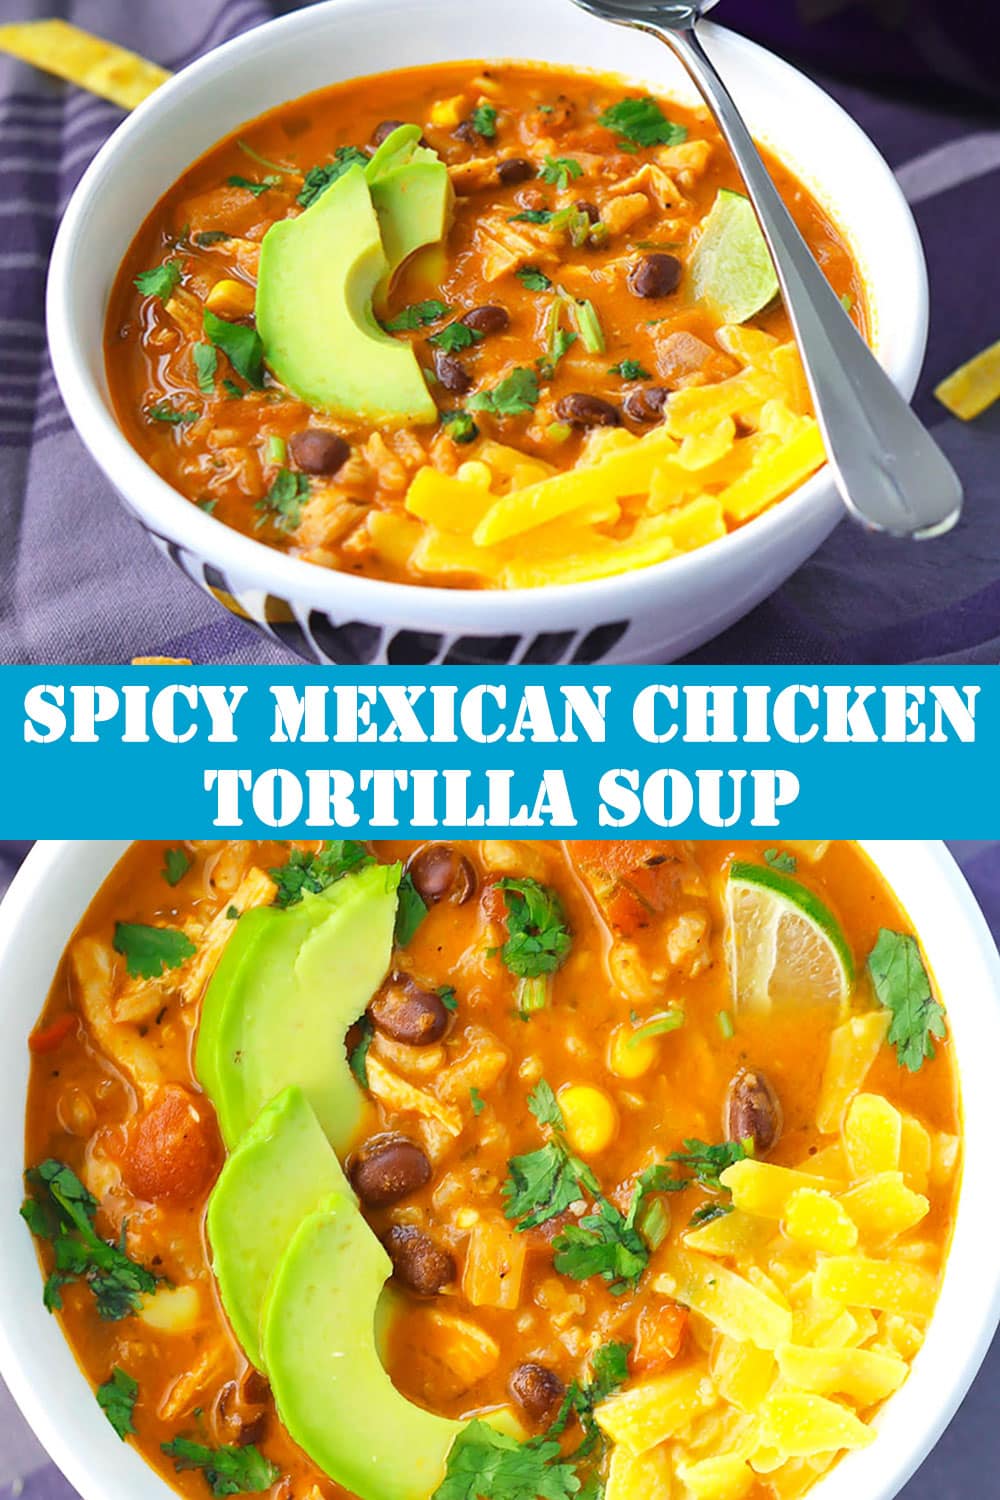 Spicy Mexican Chicken Tortilla Soup | That Spicy Chick